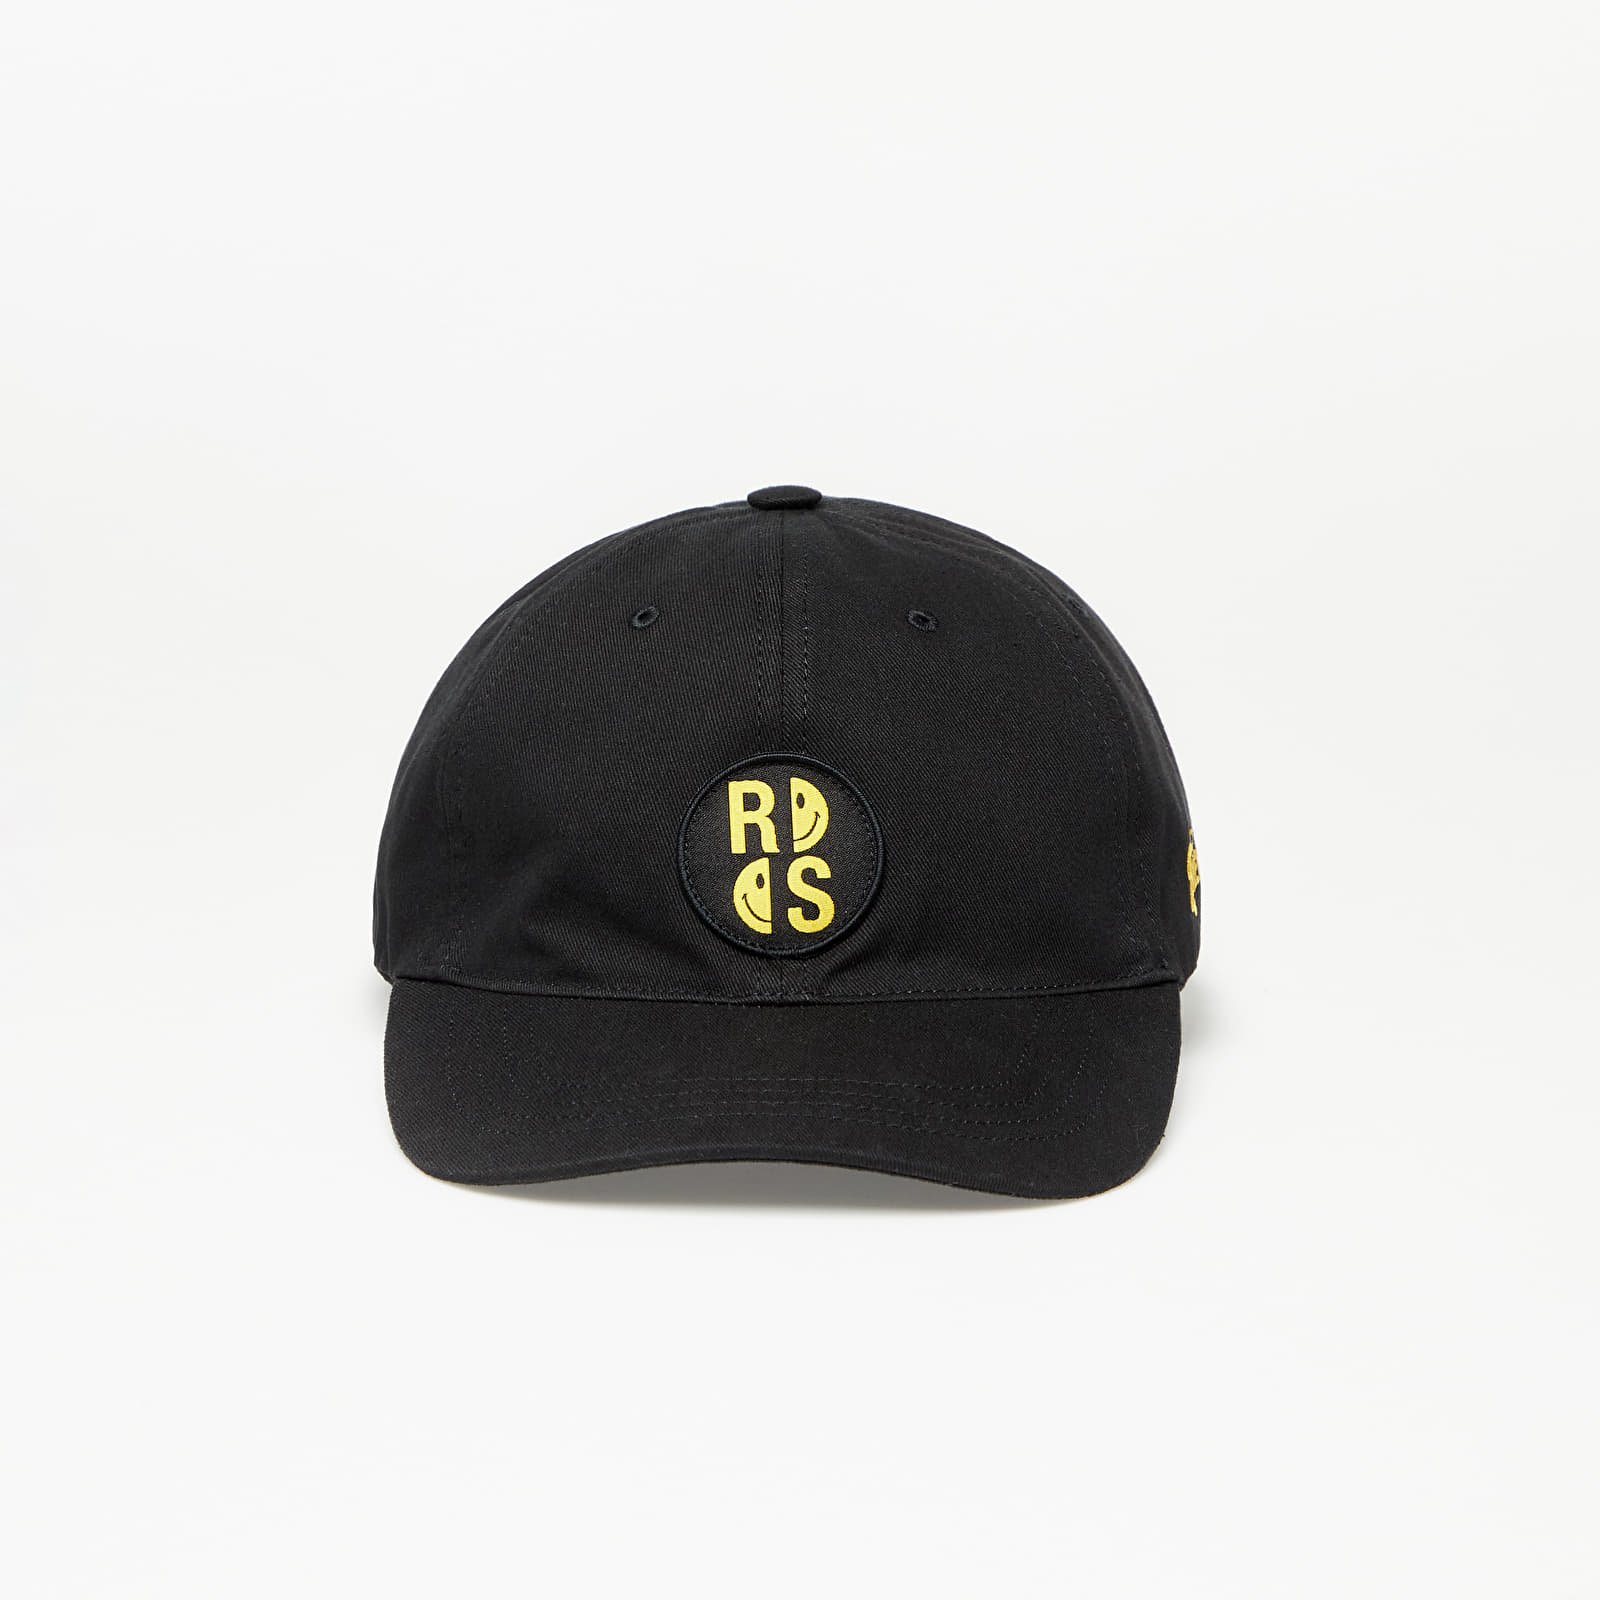 Cap With Rs-Smiley Badge